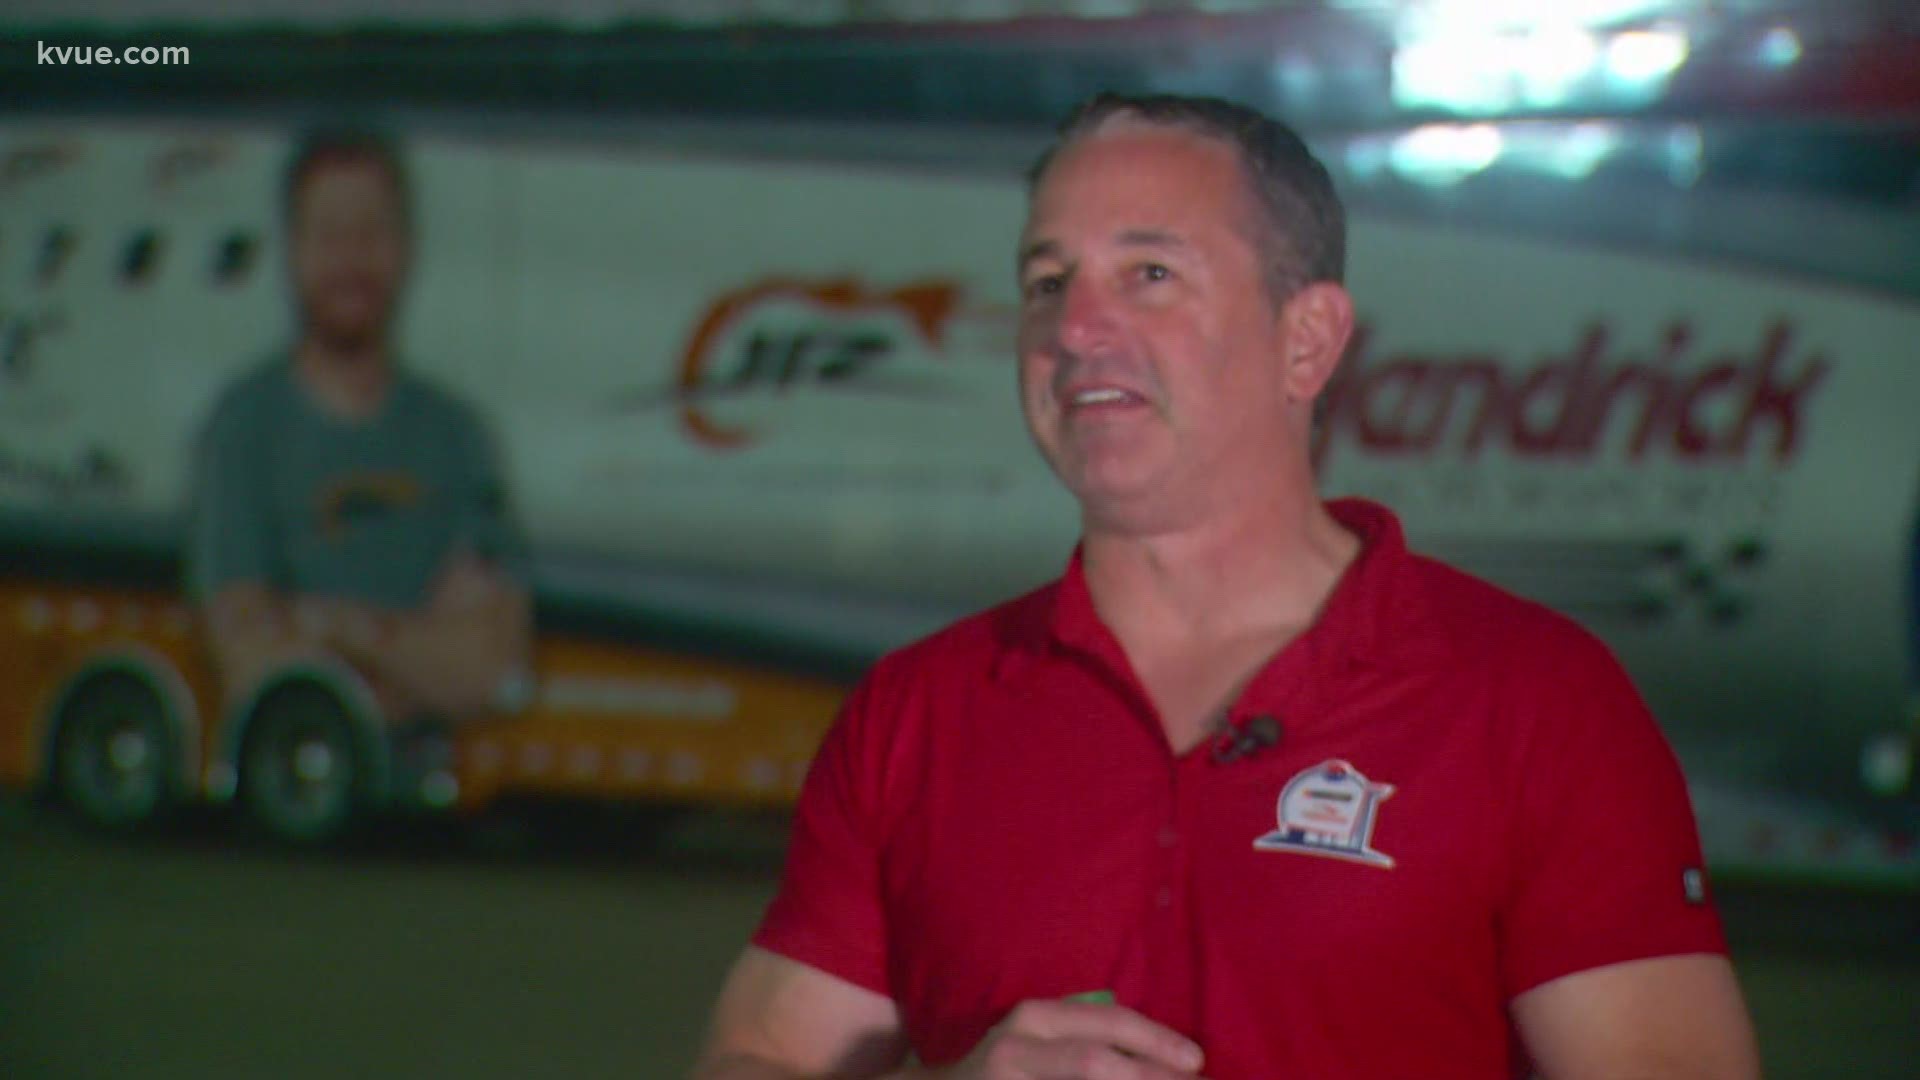 NASCAR is coming to Austin for the first time ever! KVUE's Tori Larned spoke to Jeff Ulrich with Speedway Motorsports ahead of the race this weekend.